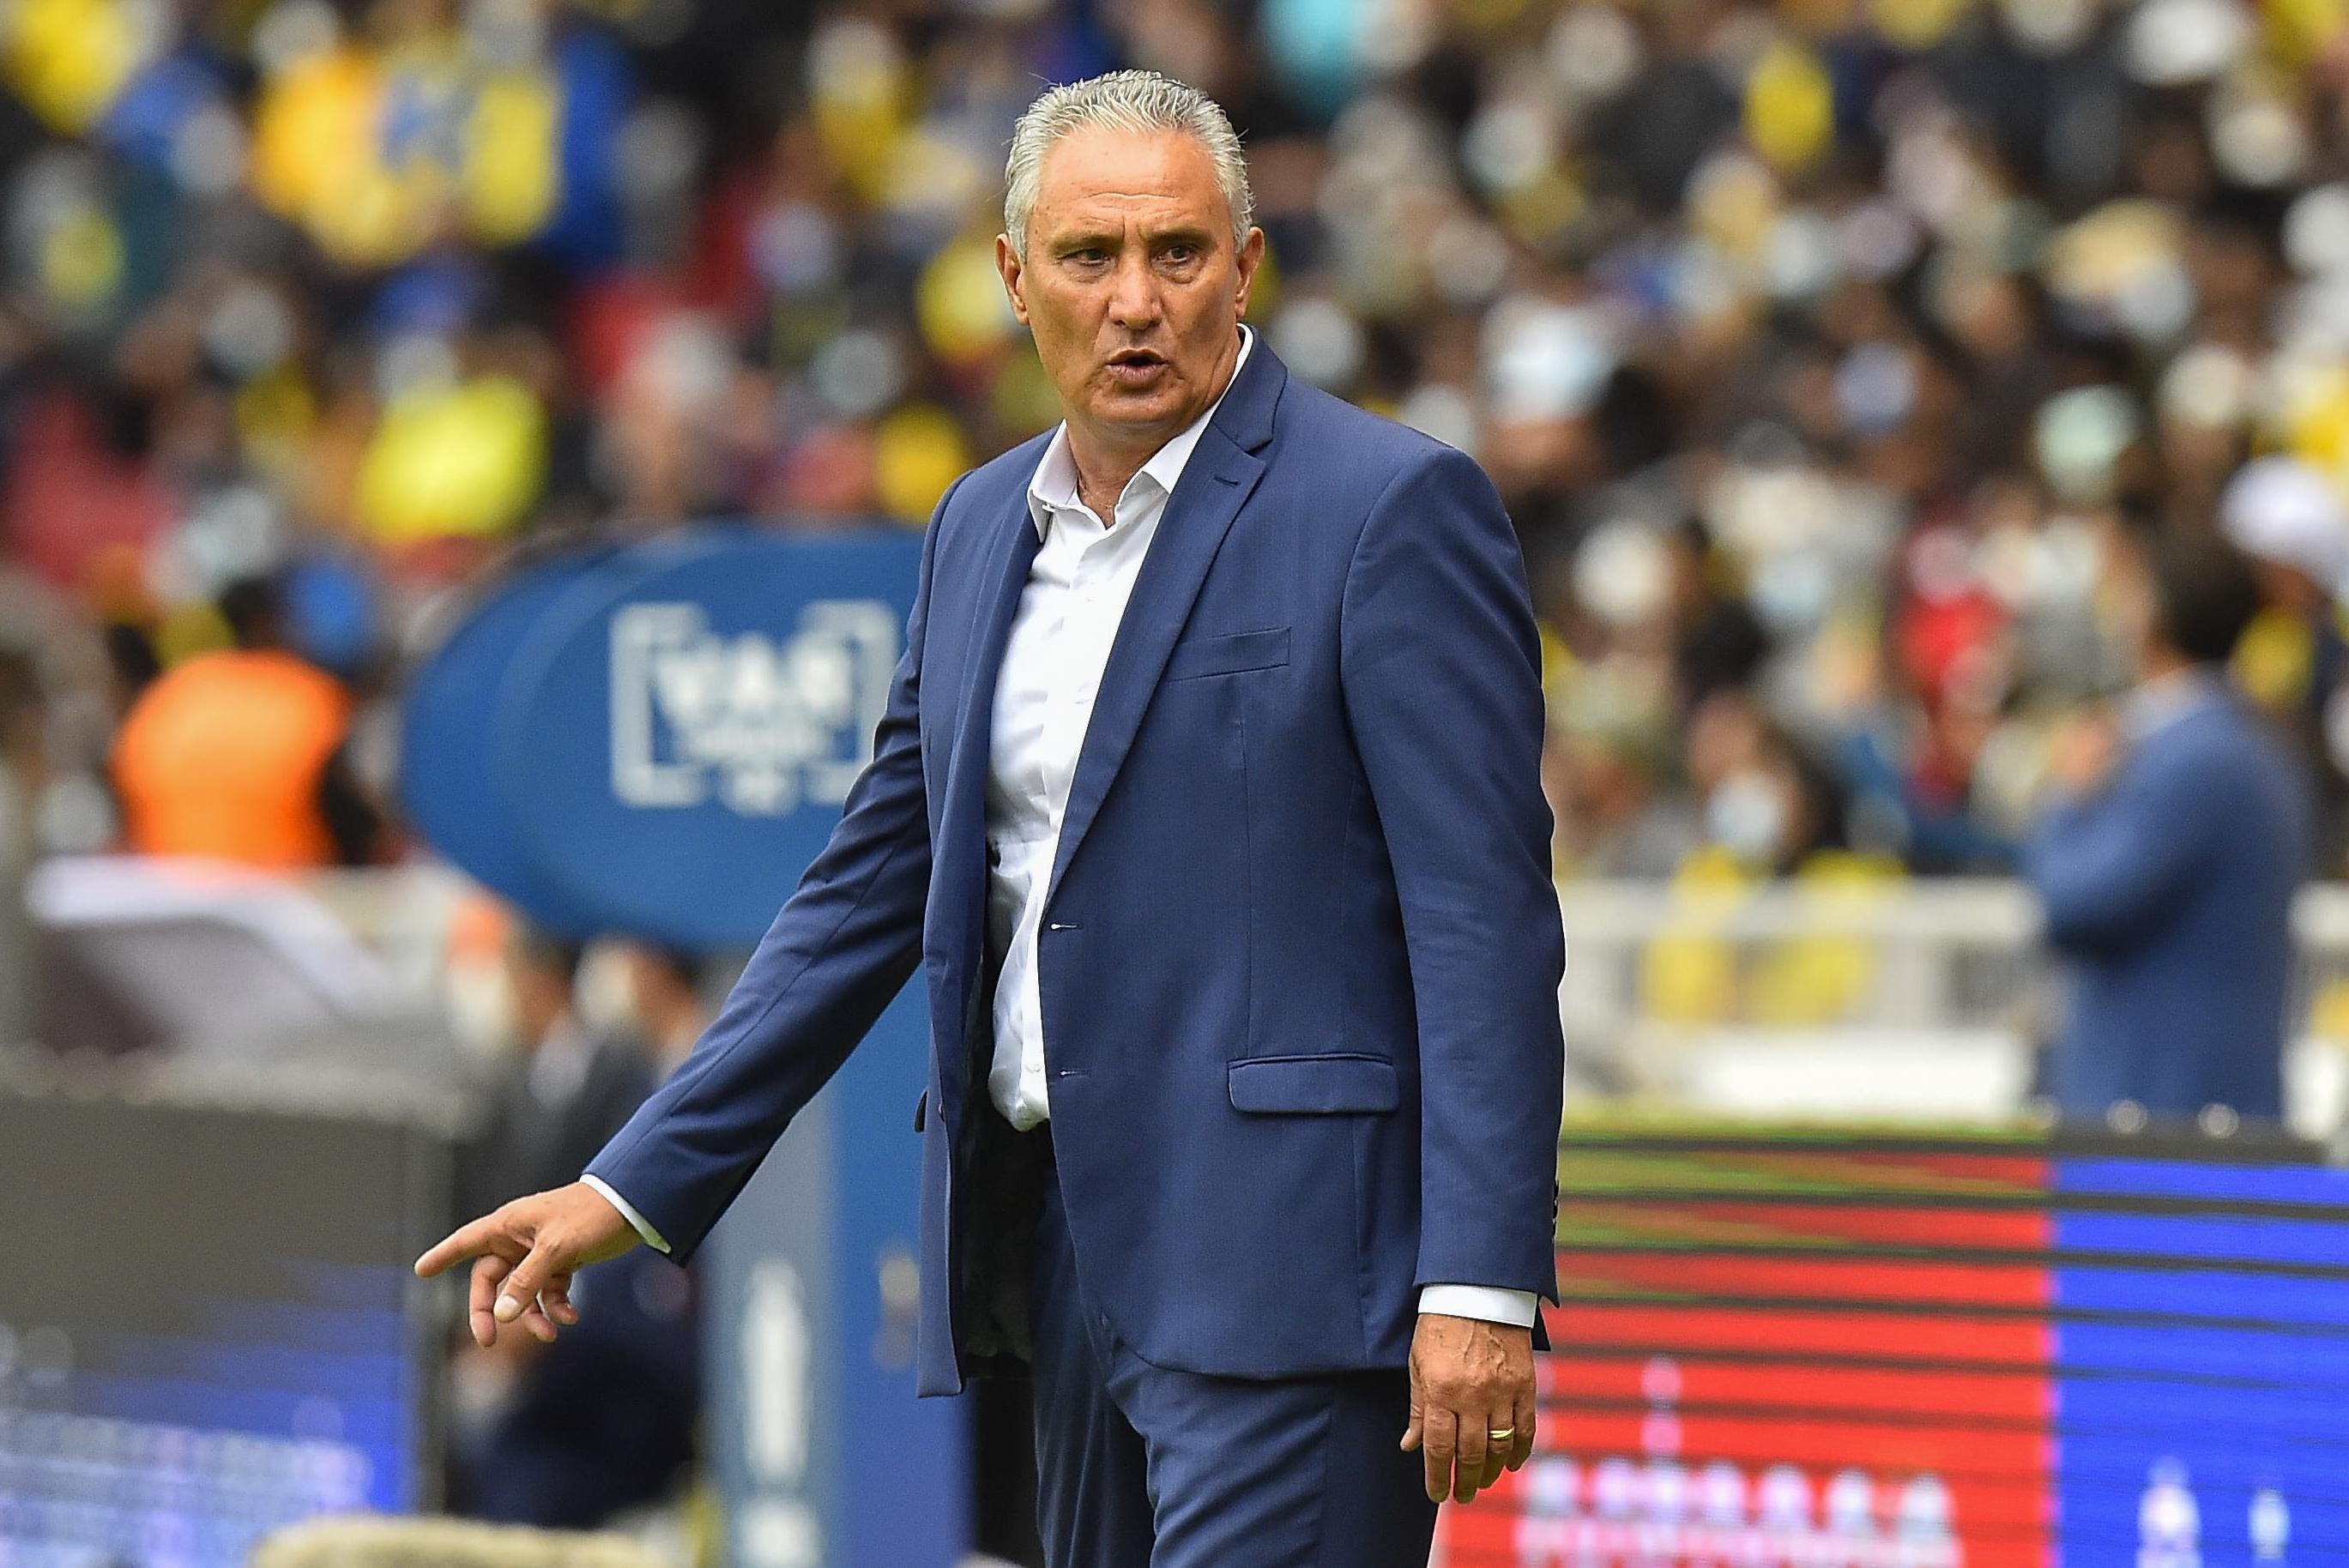 Brazil coach Tite to step down after World Cup in Qatar | AP News